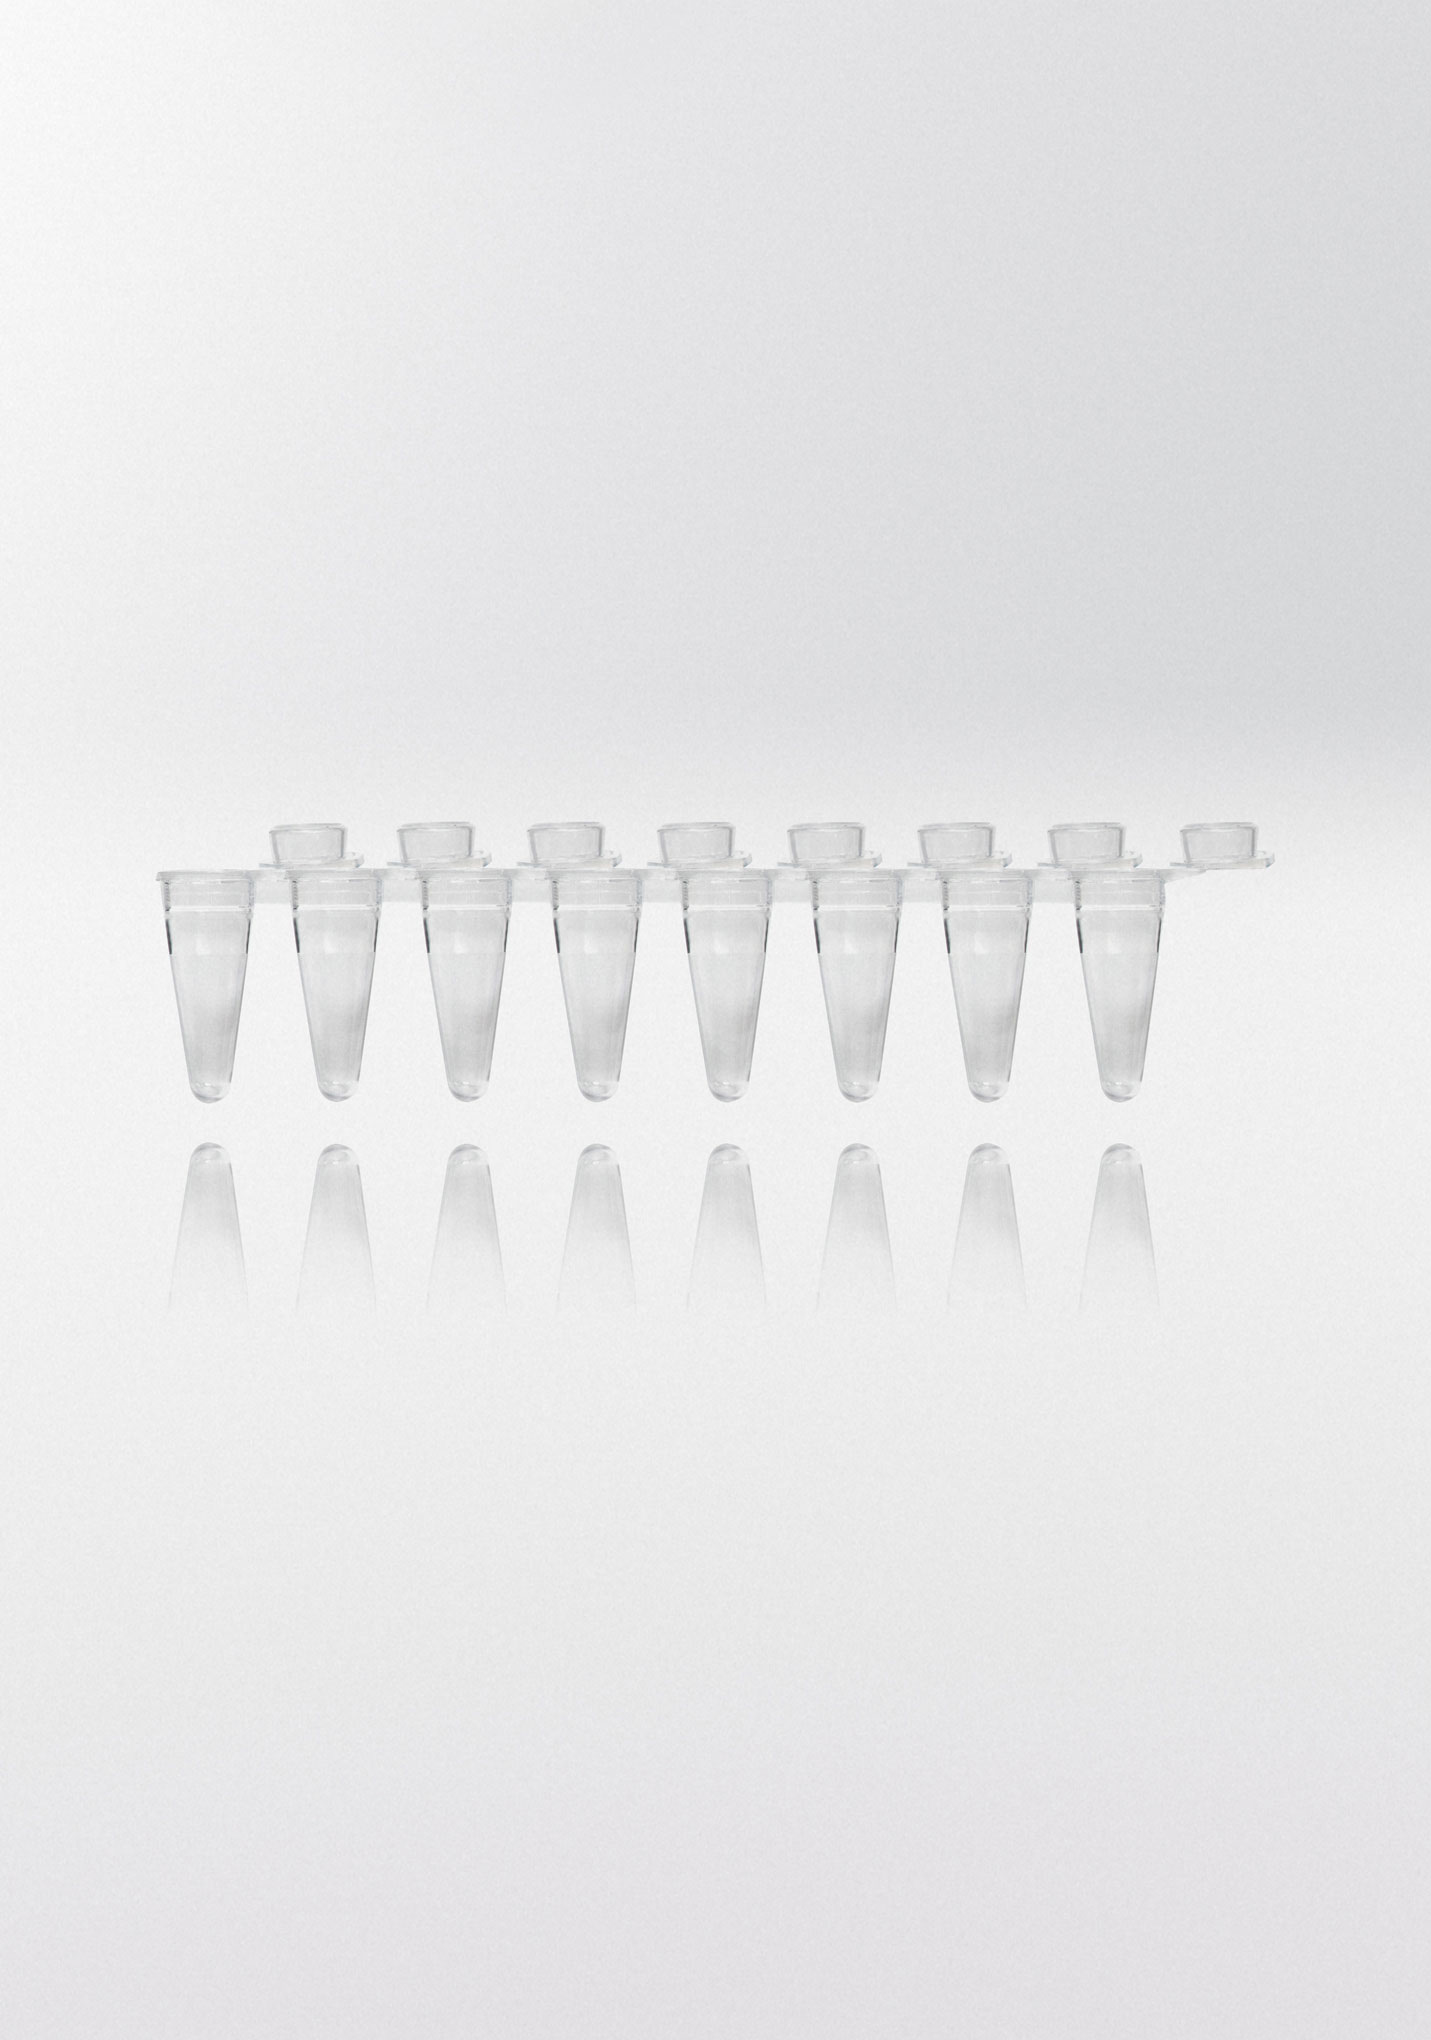 Strips of tubes for PCR